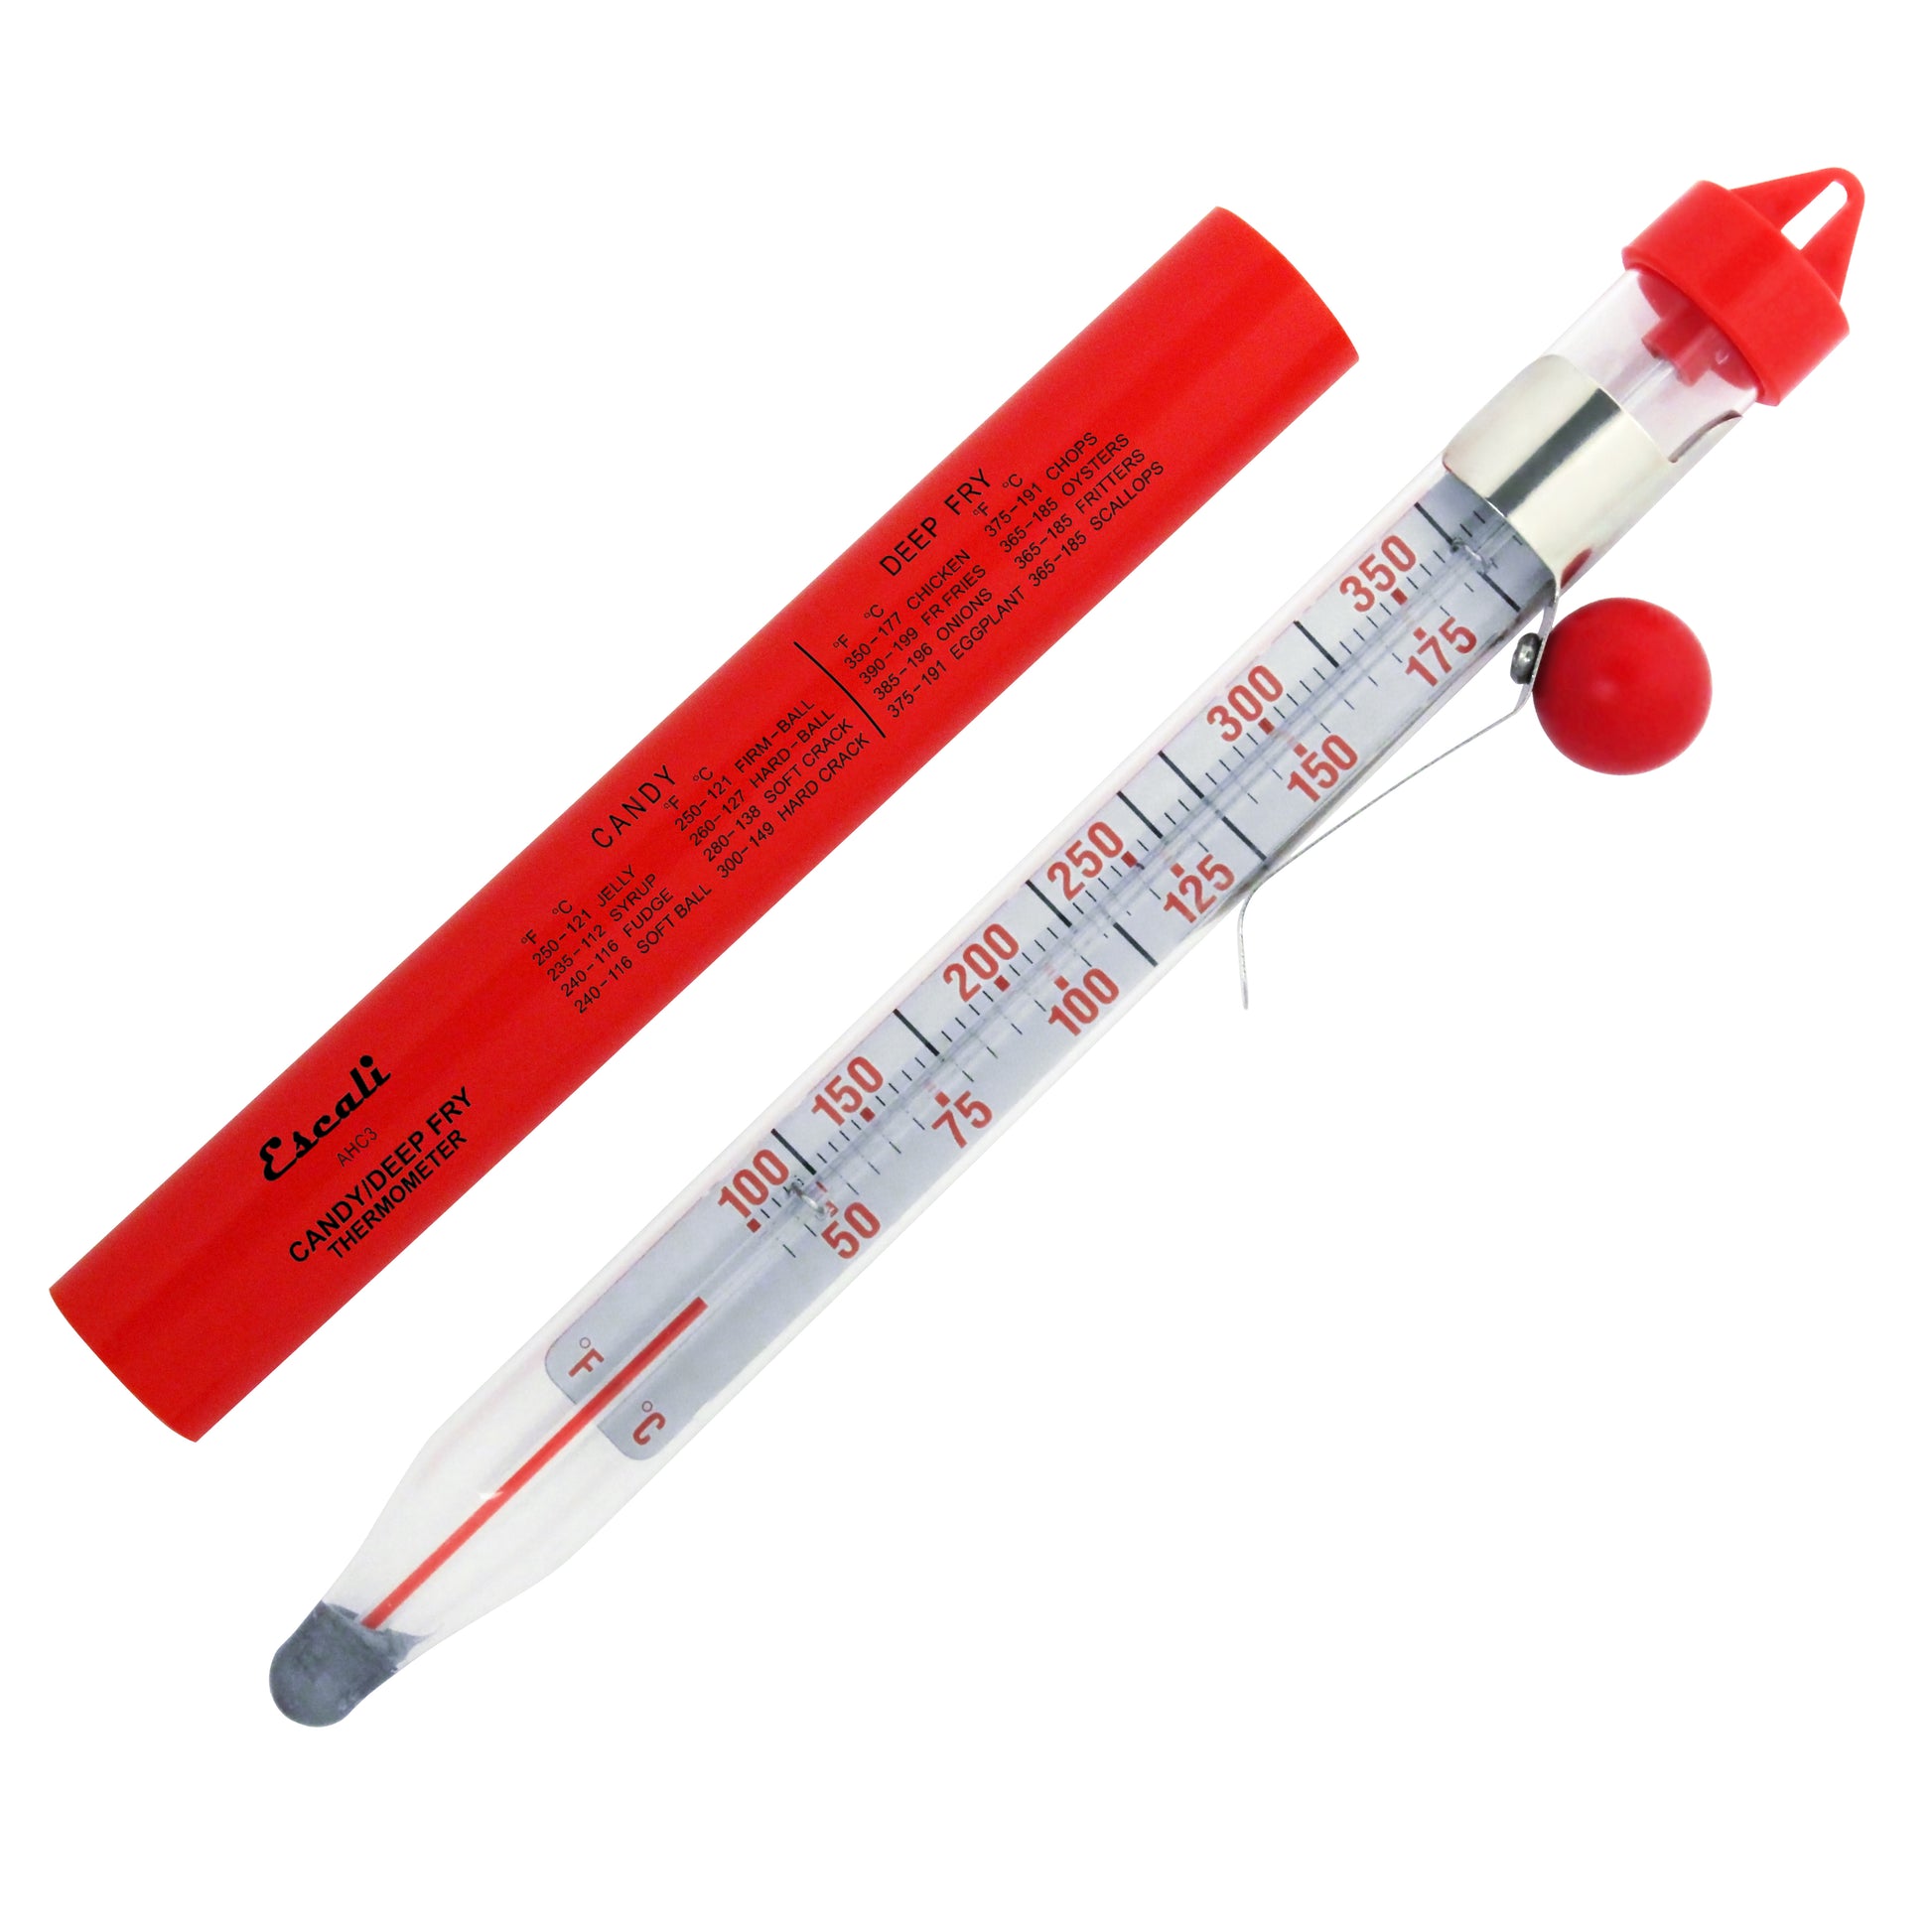 Deep Fry Candy Thermometer - The Peppermill